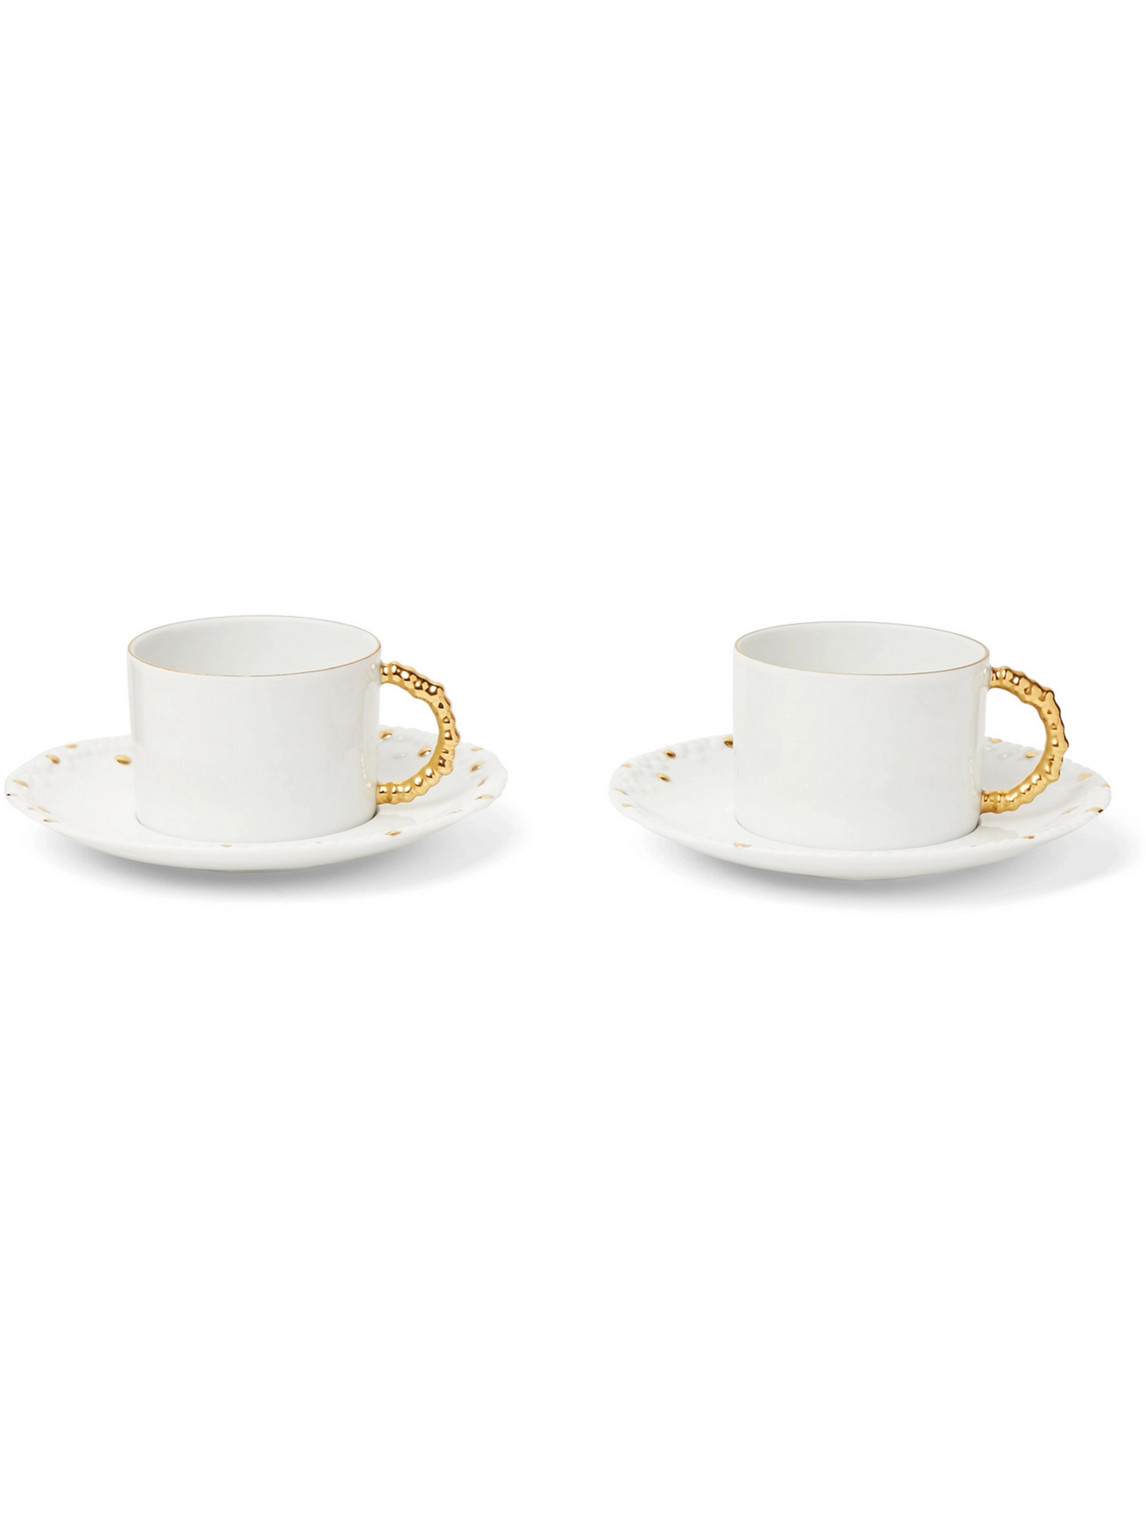 L'Objet - Haas Mojave Set of Two Gold-Plated Porcelain Tea Cups and Saucers - Men - White von L'Objet